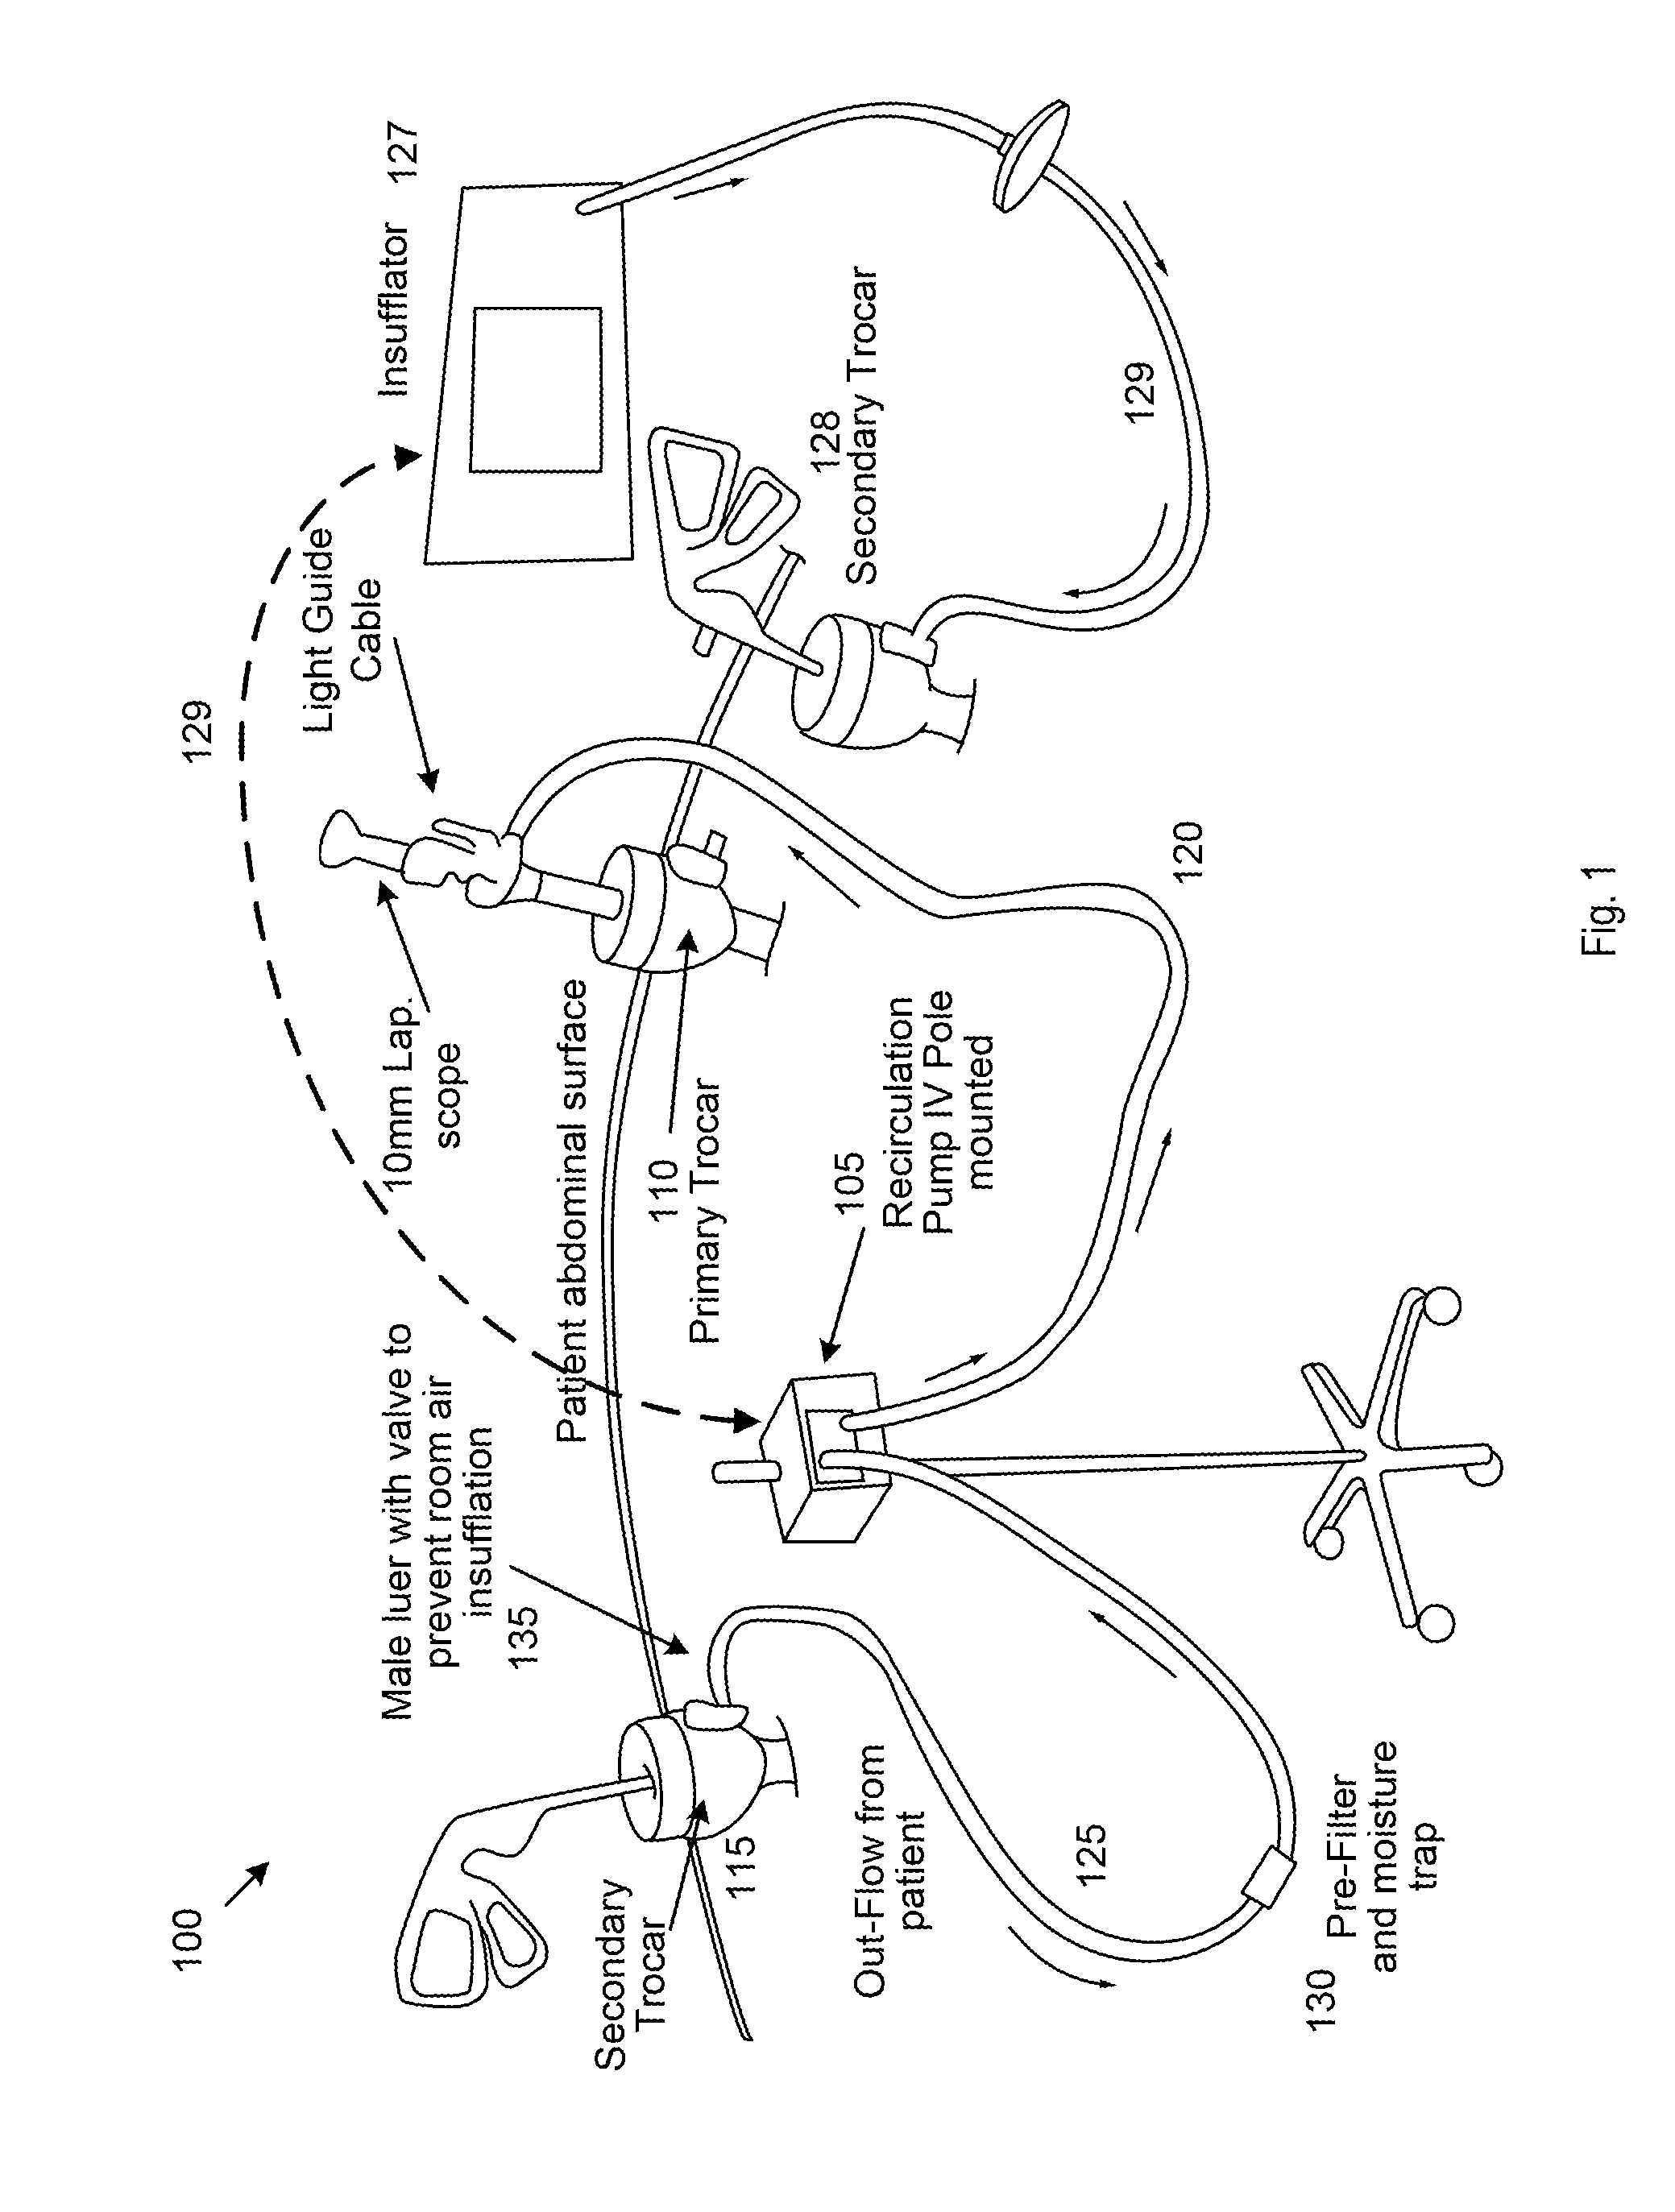 Gas recirculation system and method